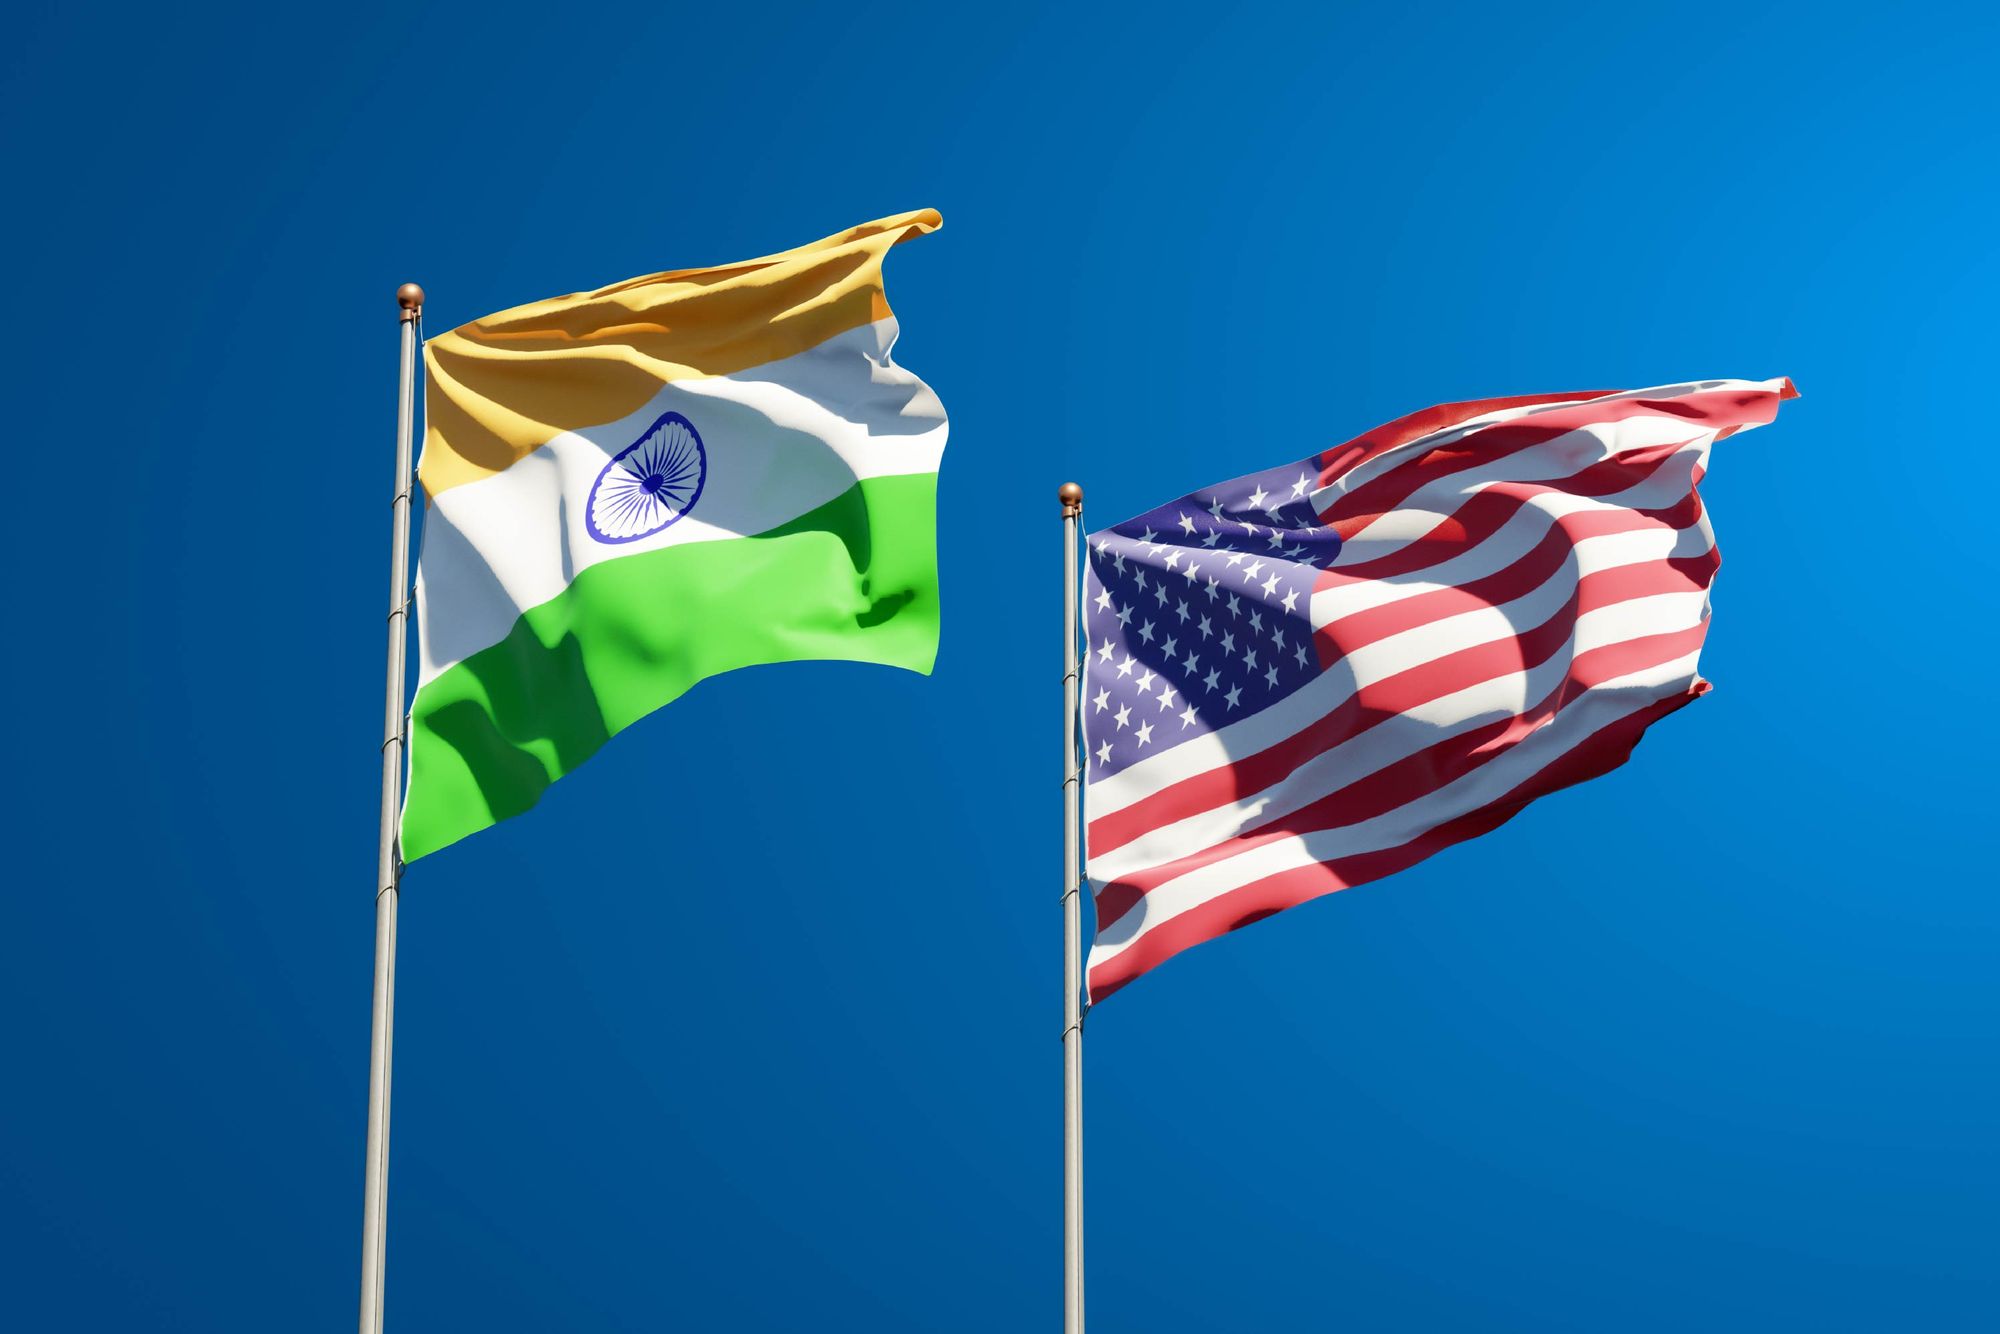 The US and India are also among the countries that could ...